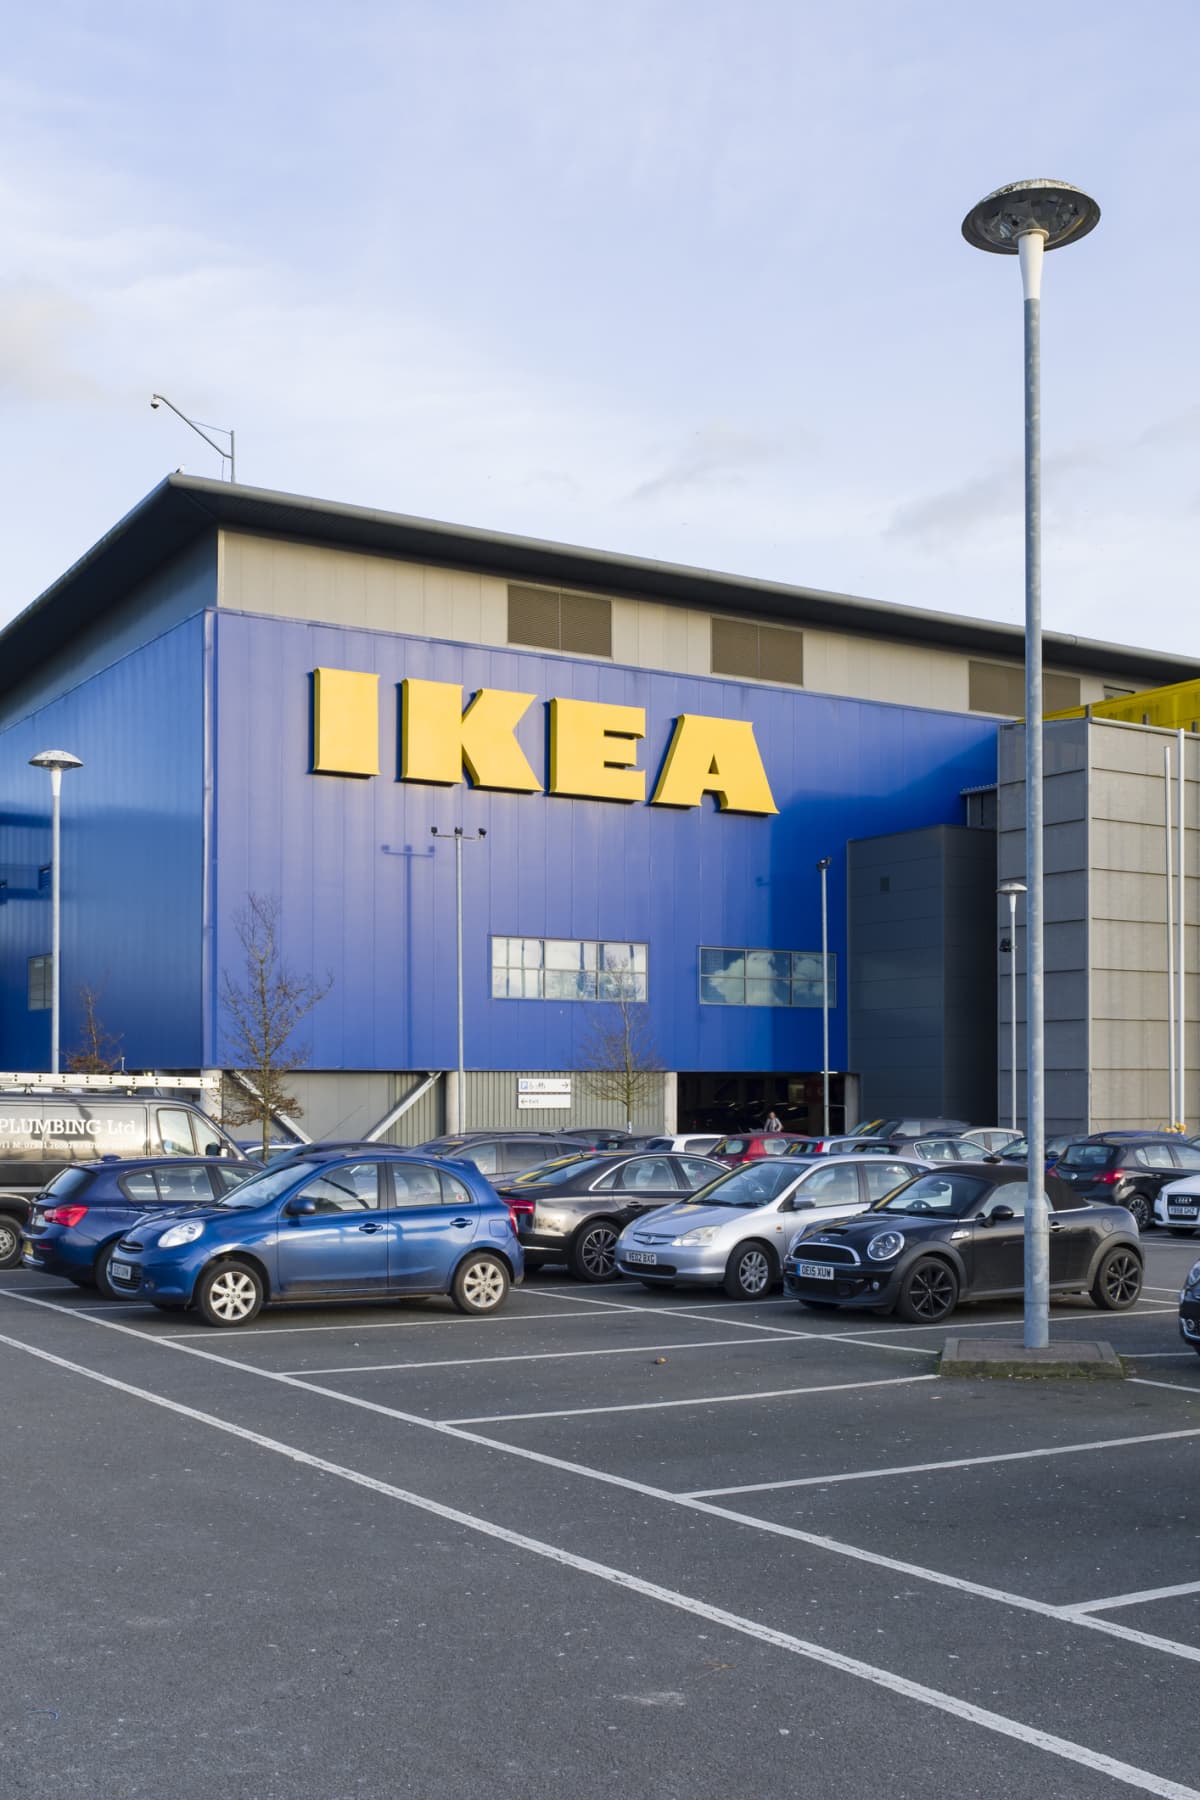 Ikea store with car parked in front